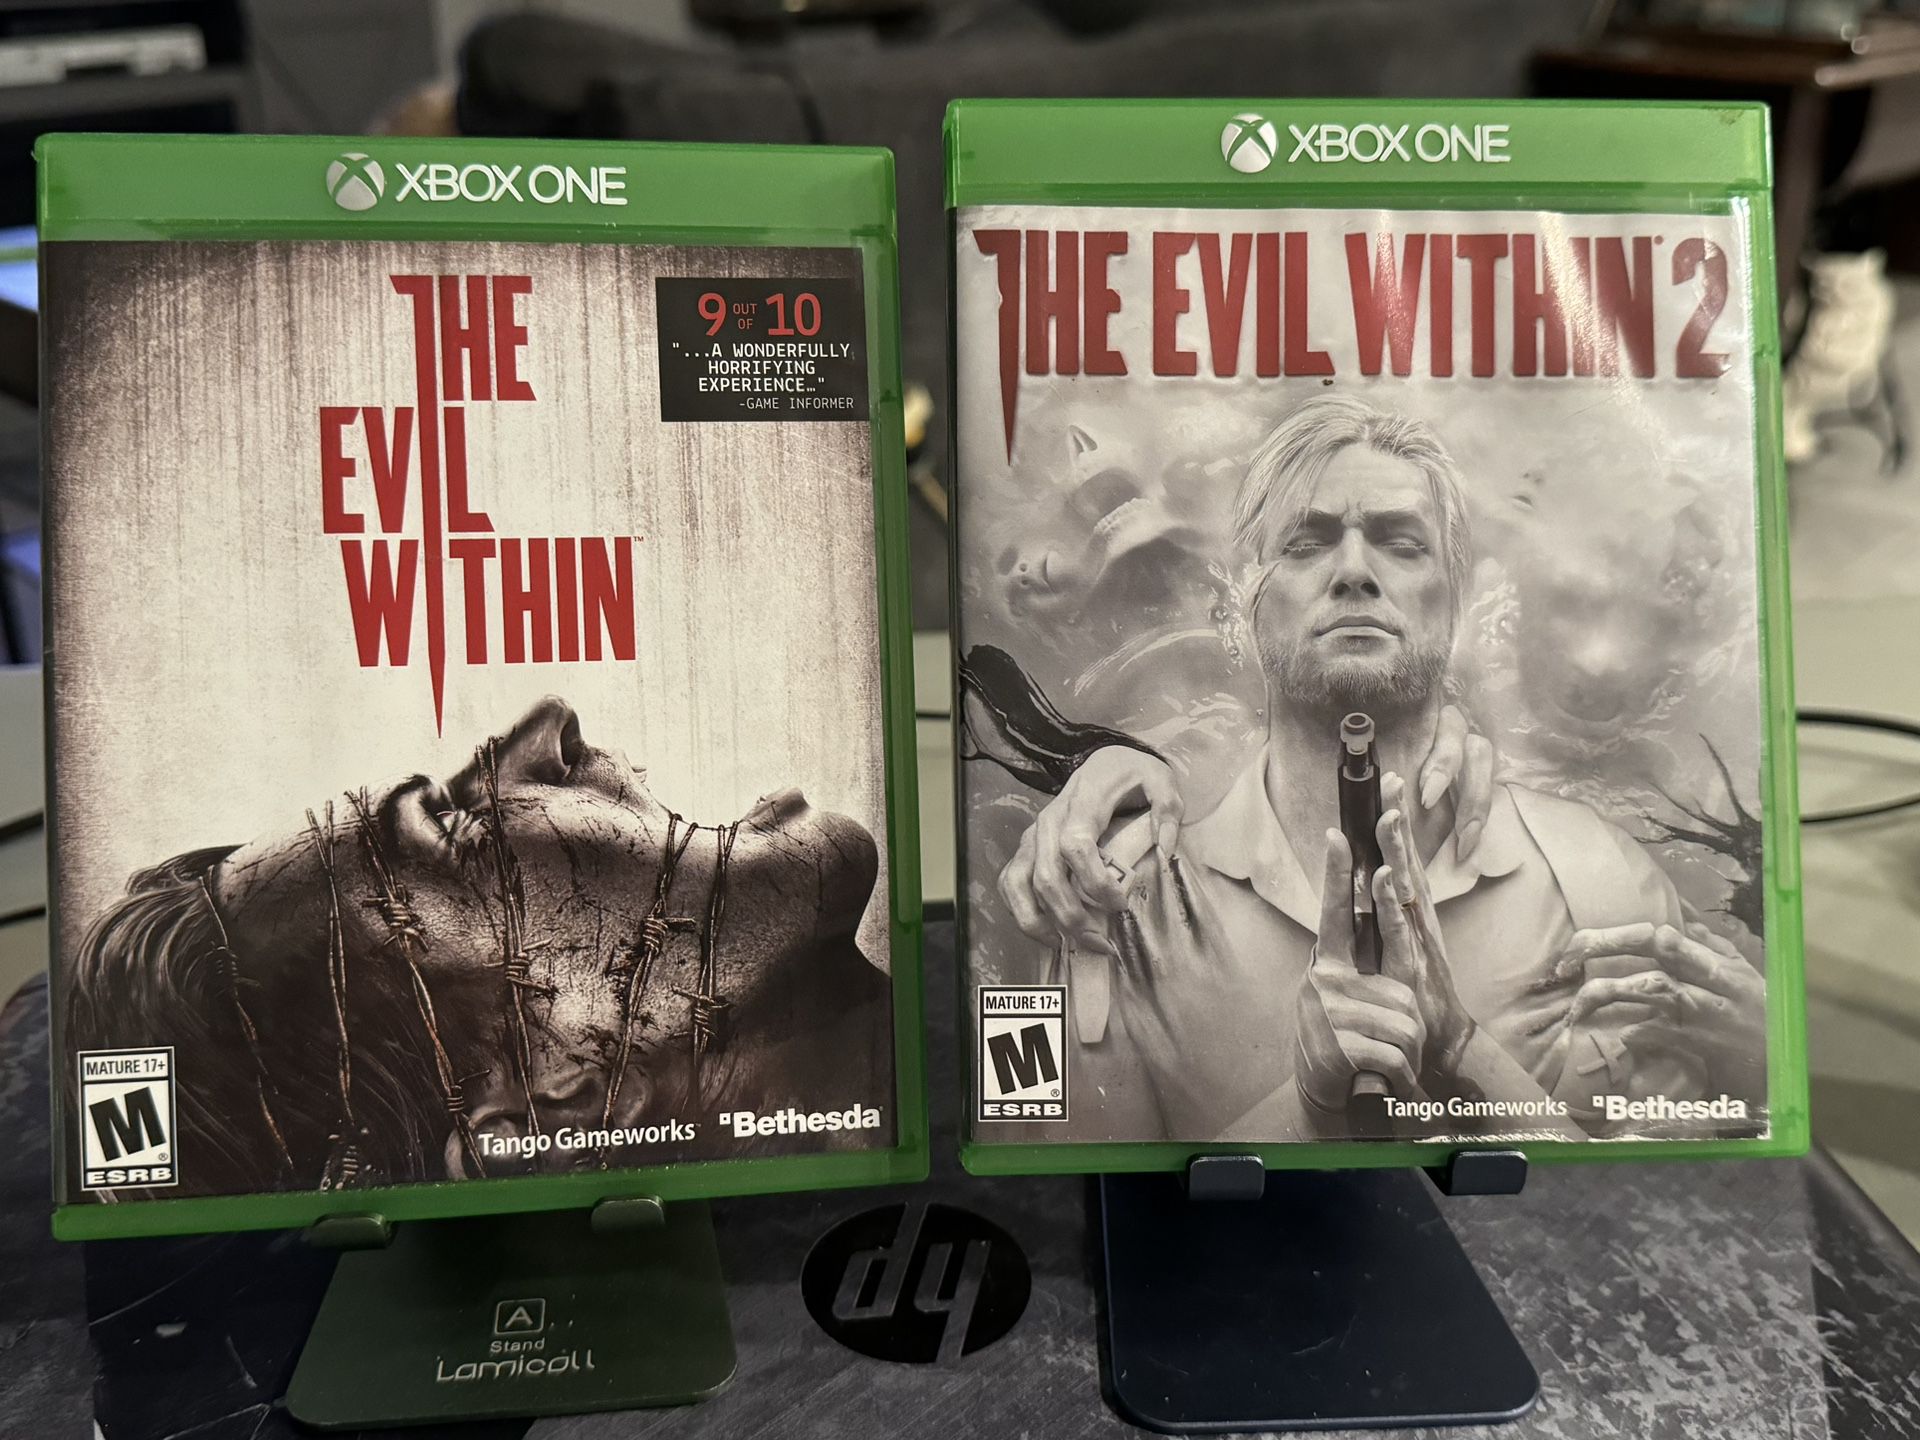 The Evil Within & The Evil Within 2 - Microsoft Xbox One. Complete & Tested. Clean discs